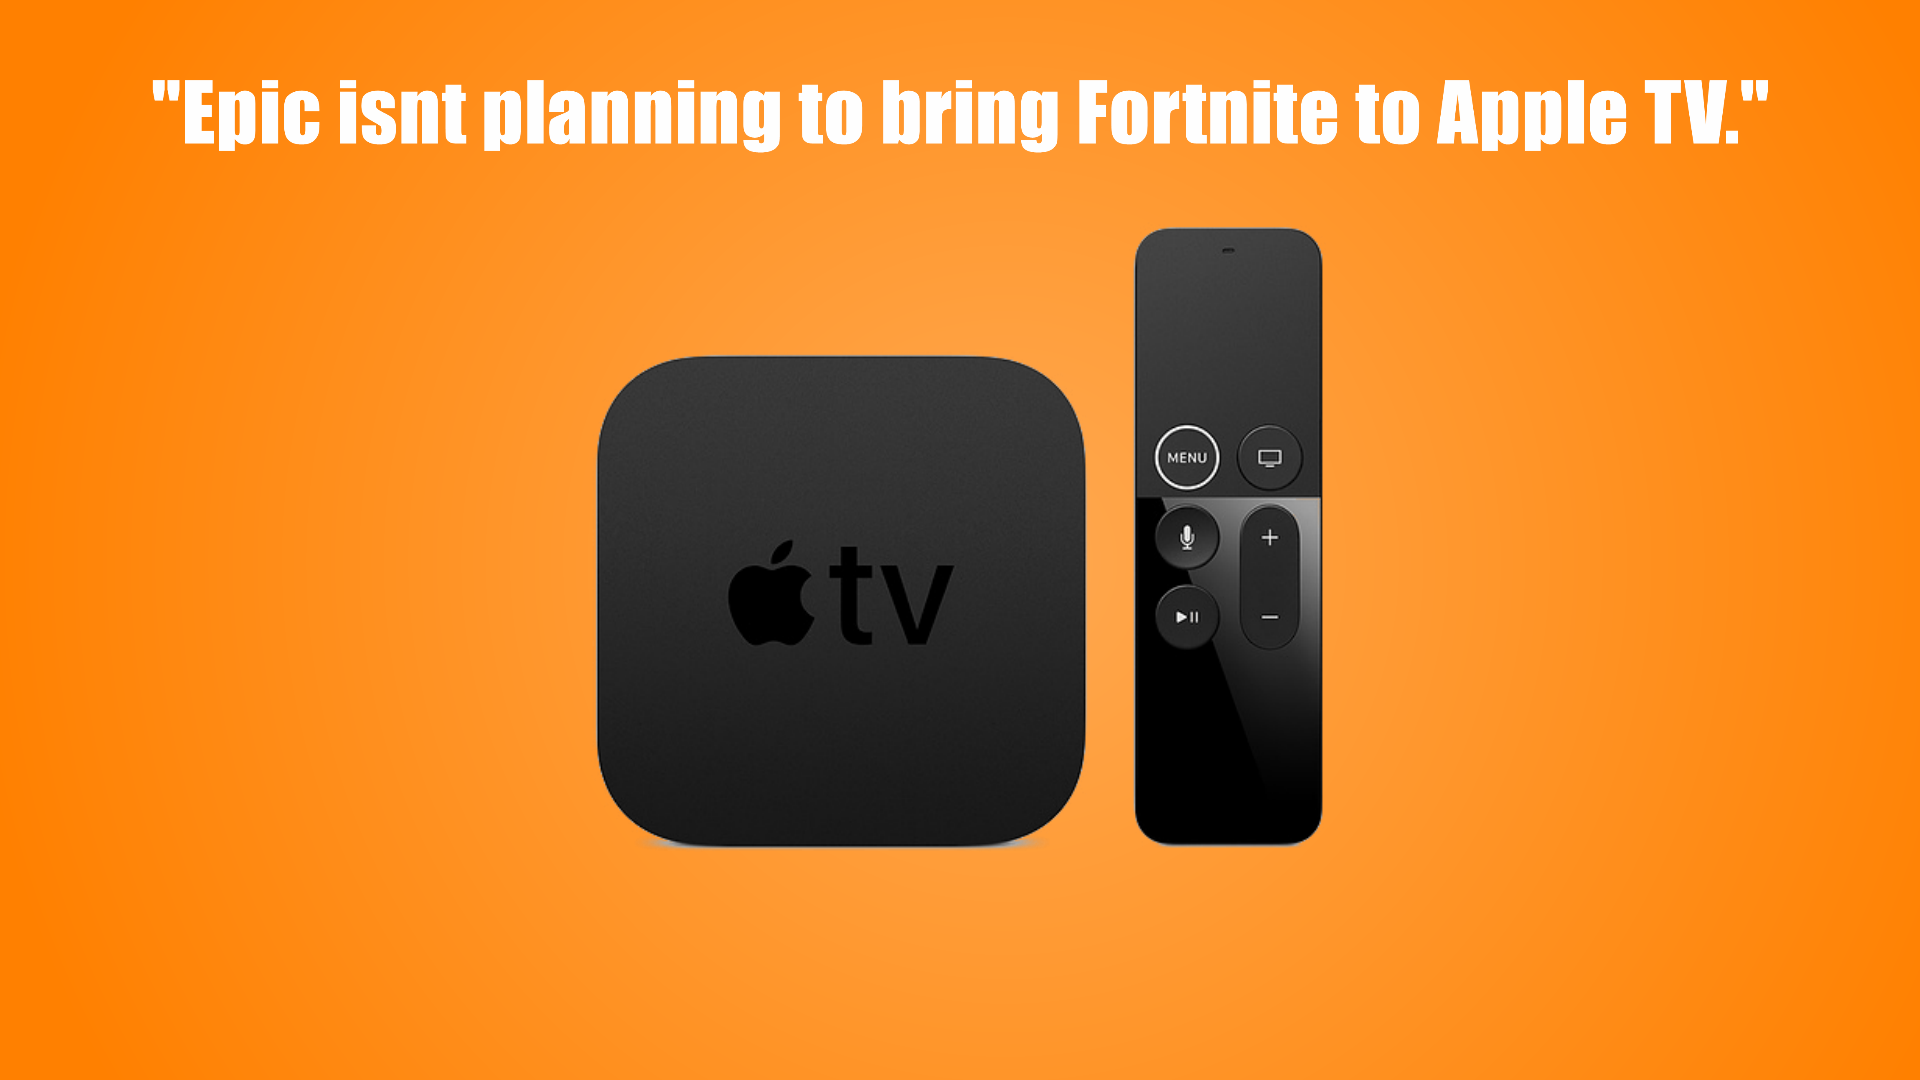 fortnite isn t coming to apple tv says epic fortnite news and statistics ss1 - fortnite on apple tv